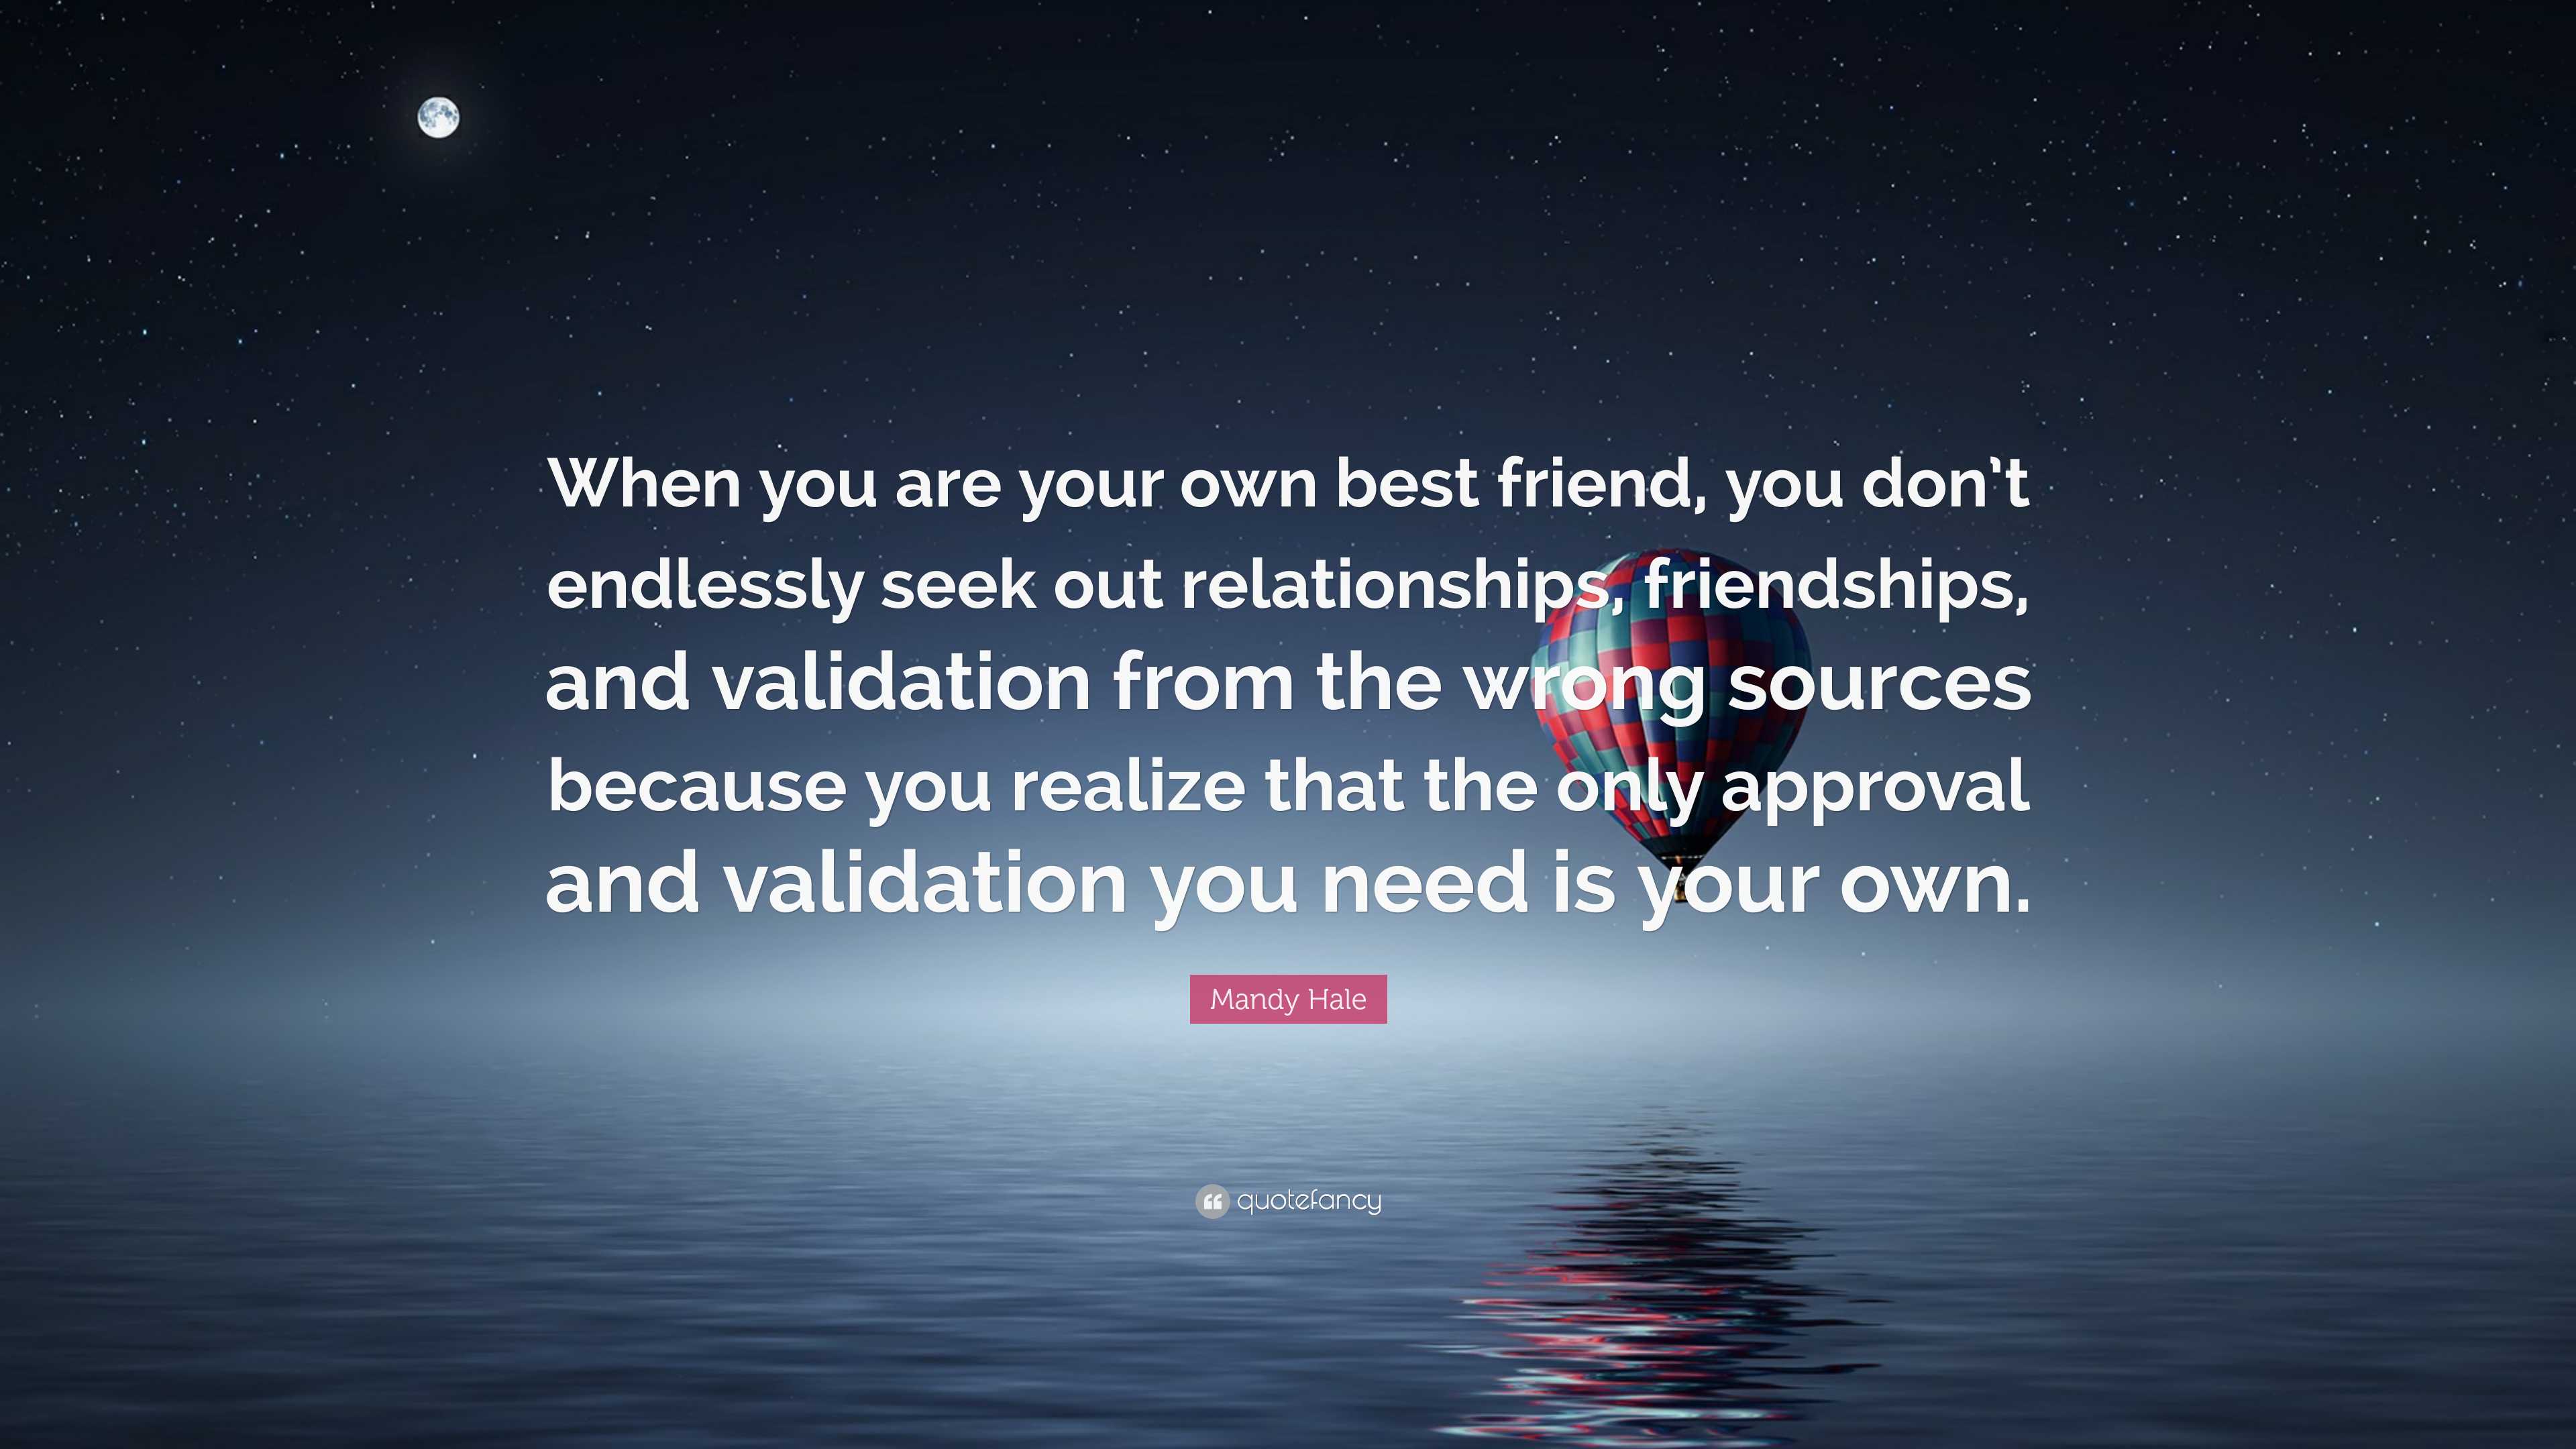 Mandy Hale Quote: “When you are your own best friend, you don’t ...